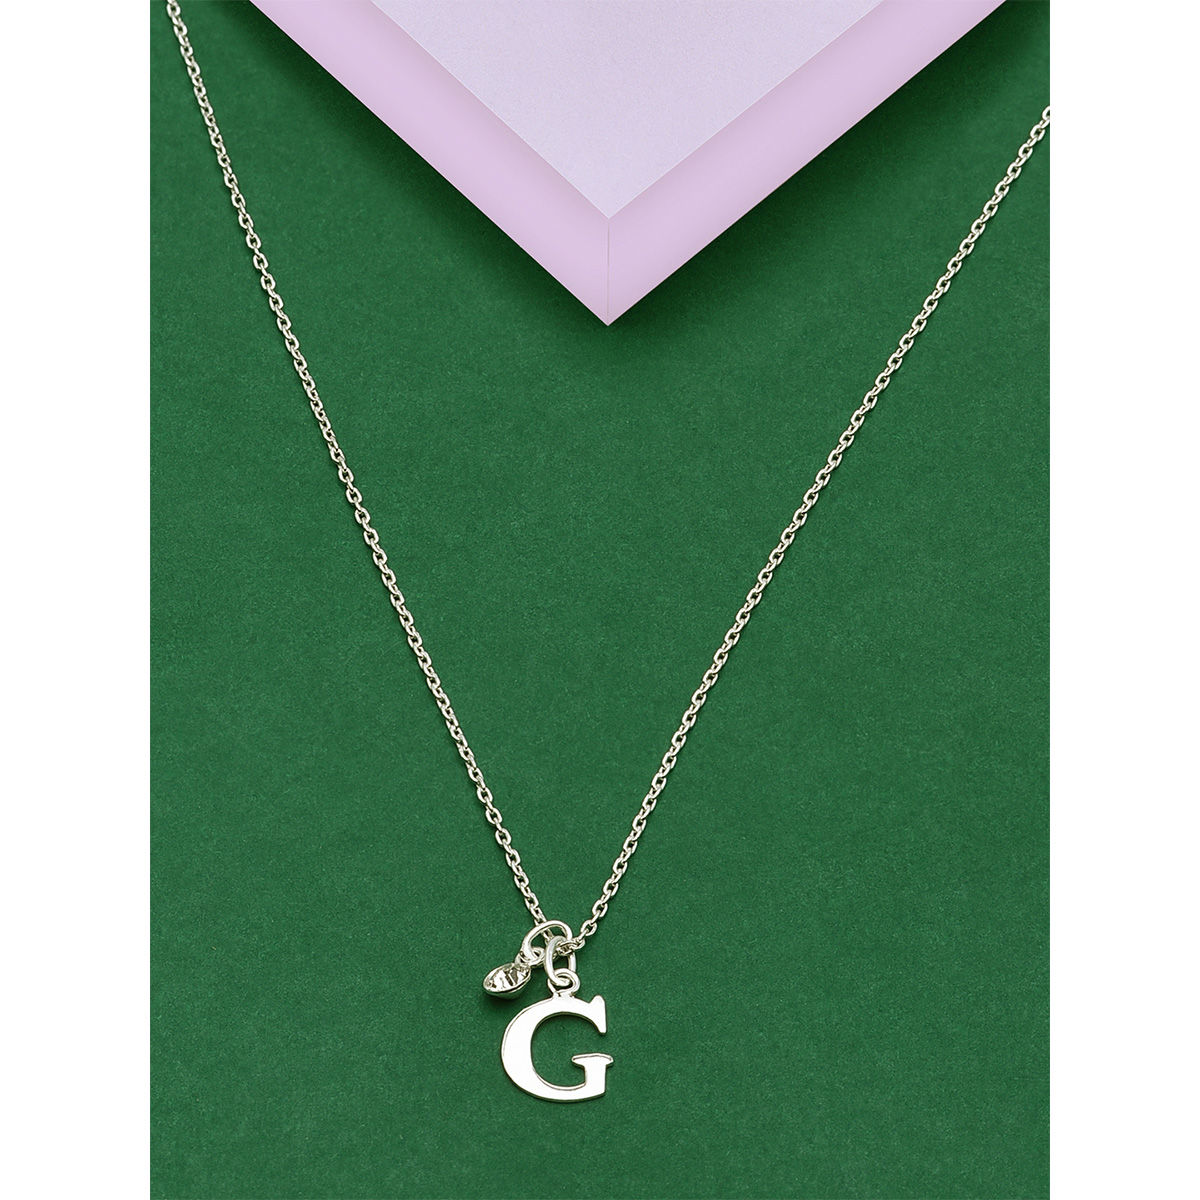 Necklace Alloy Initial Letter Necklace Big Letter Script Name Pendant  Necklace for Women Gift Valentine's Day Gift A-Z -Gold Necklace Gift (Color  : G) : Amazon.ca: Clothing, Shoes & Accessories